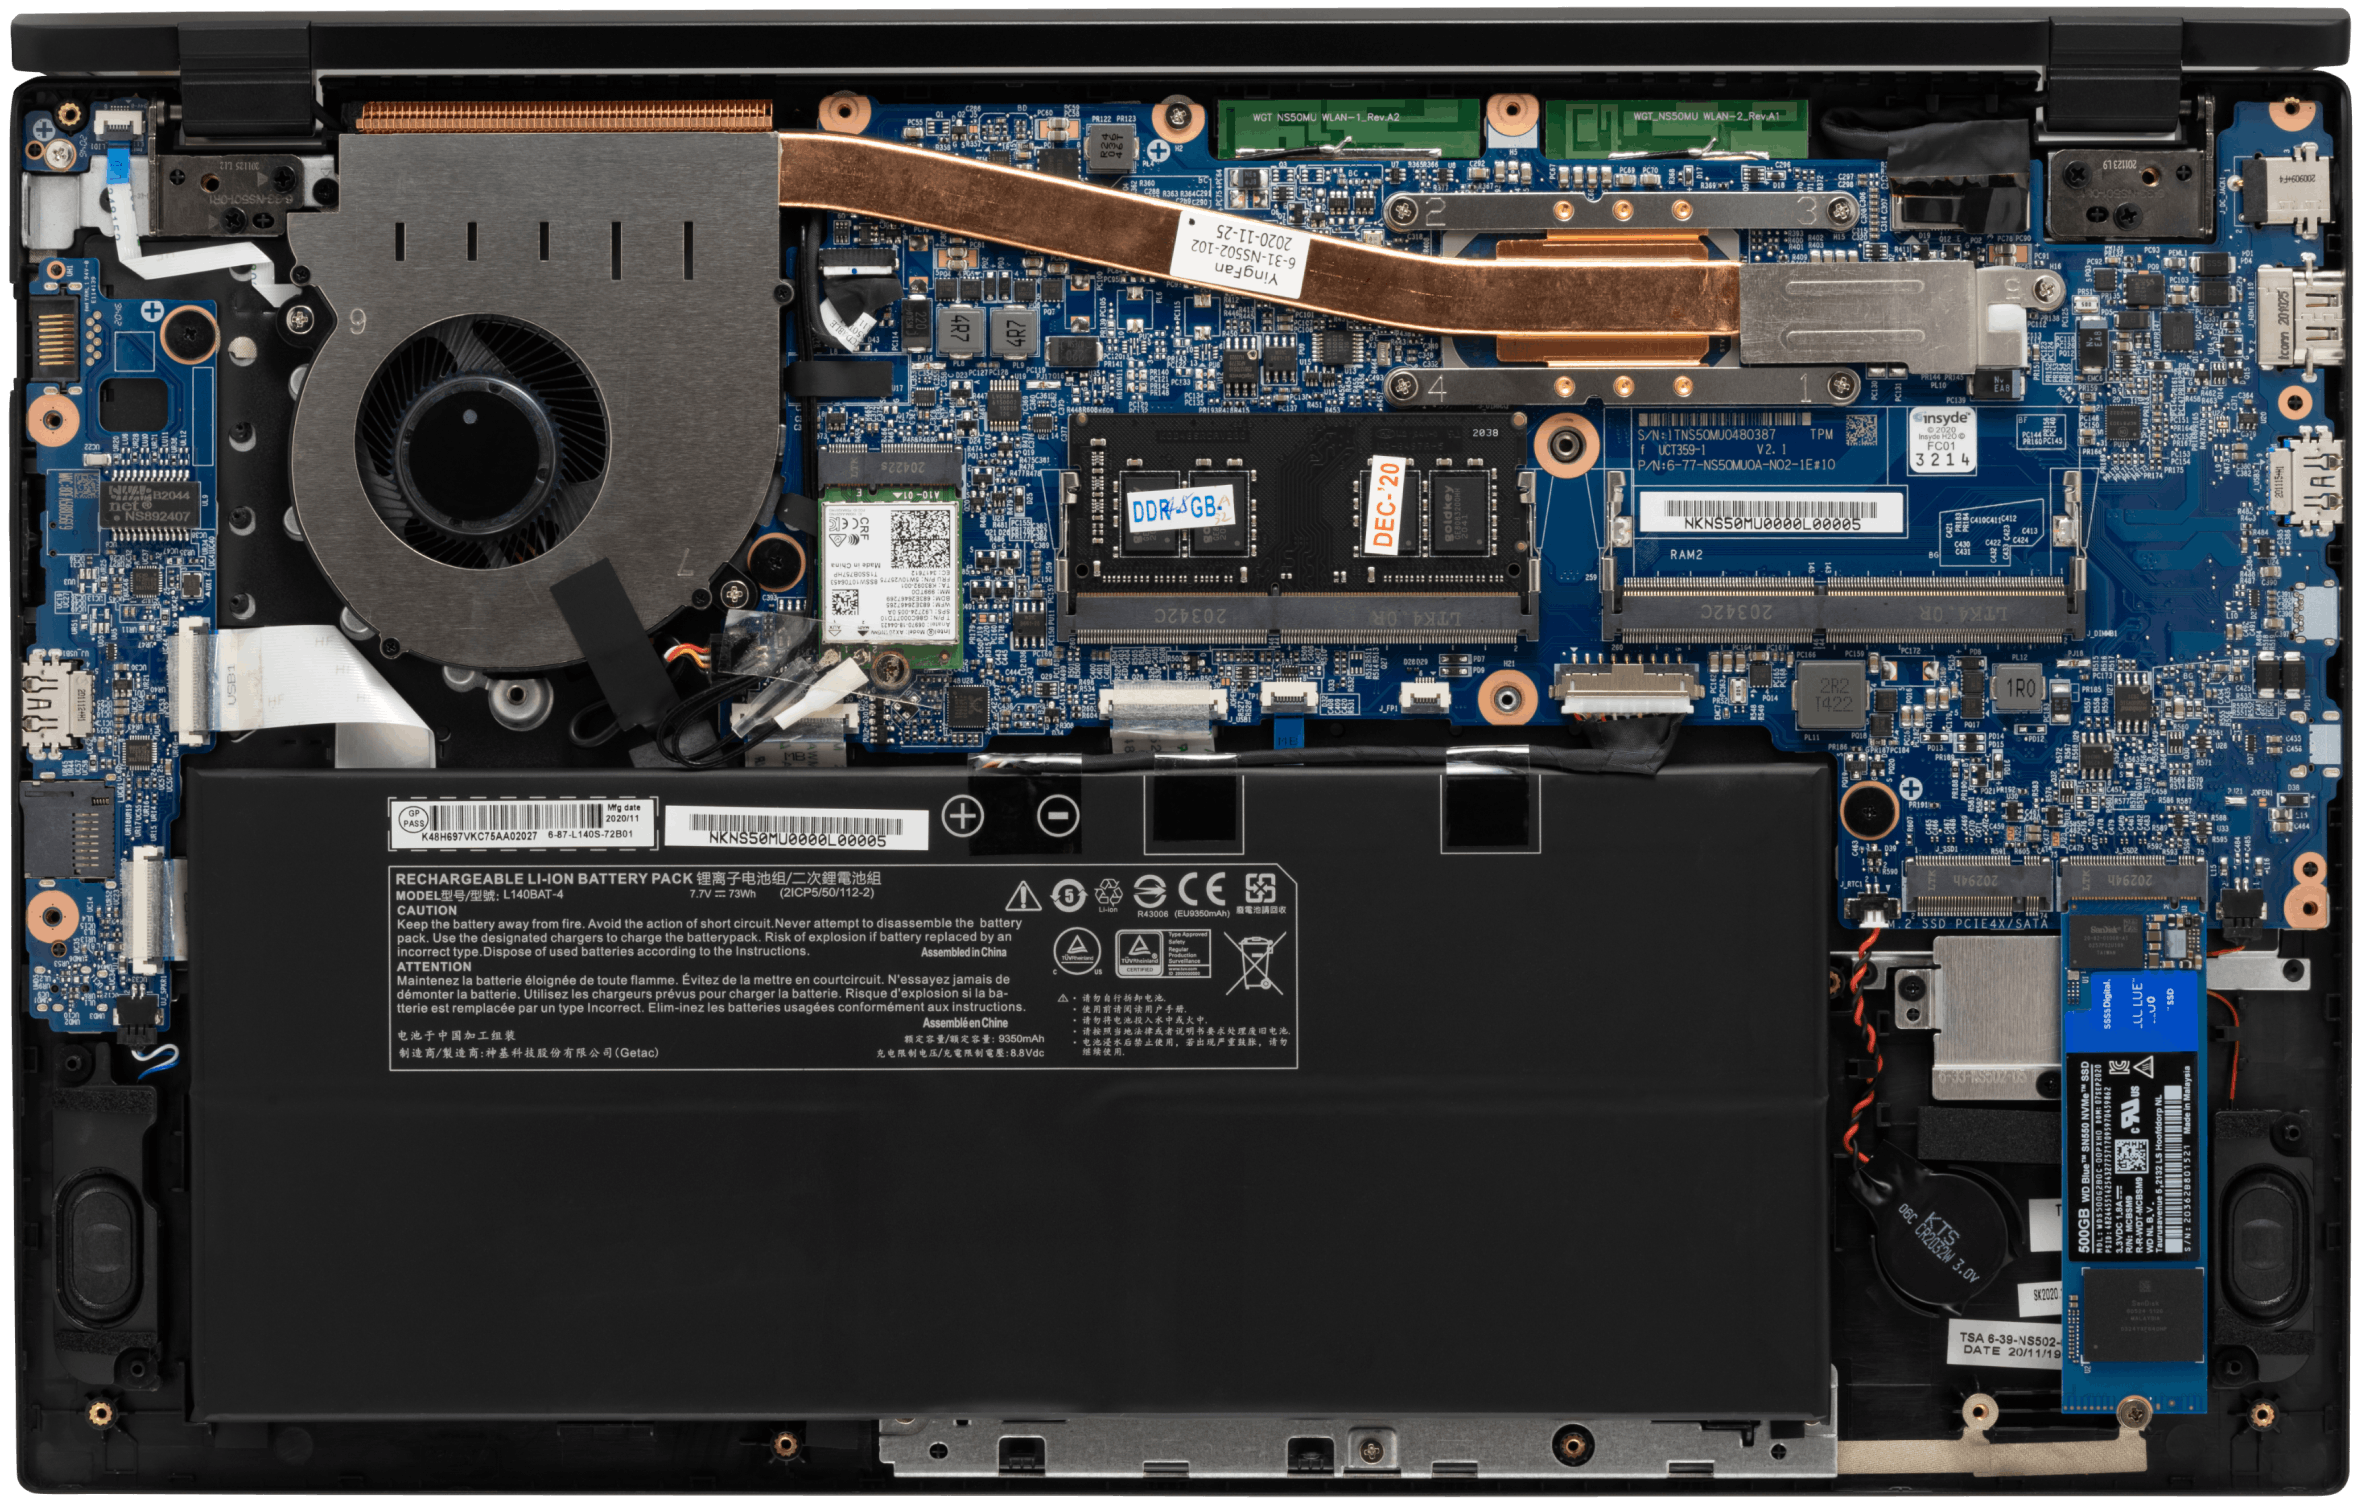 The inner workings of the Darter Pro laptop, with all hardware exposed.